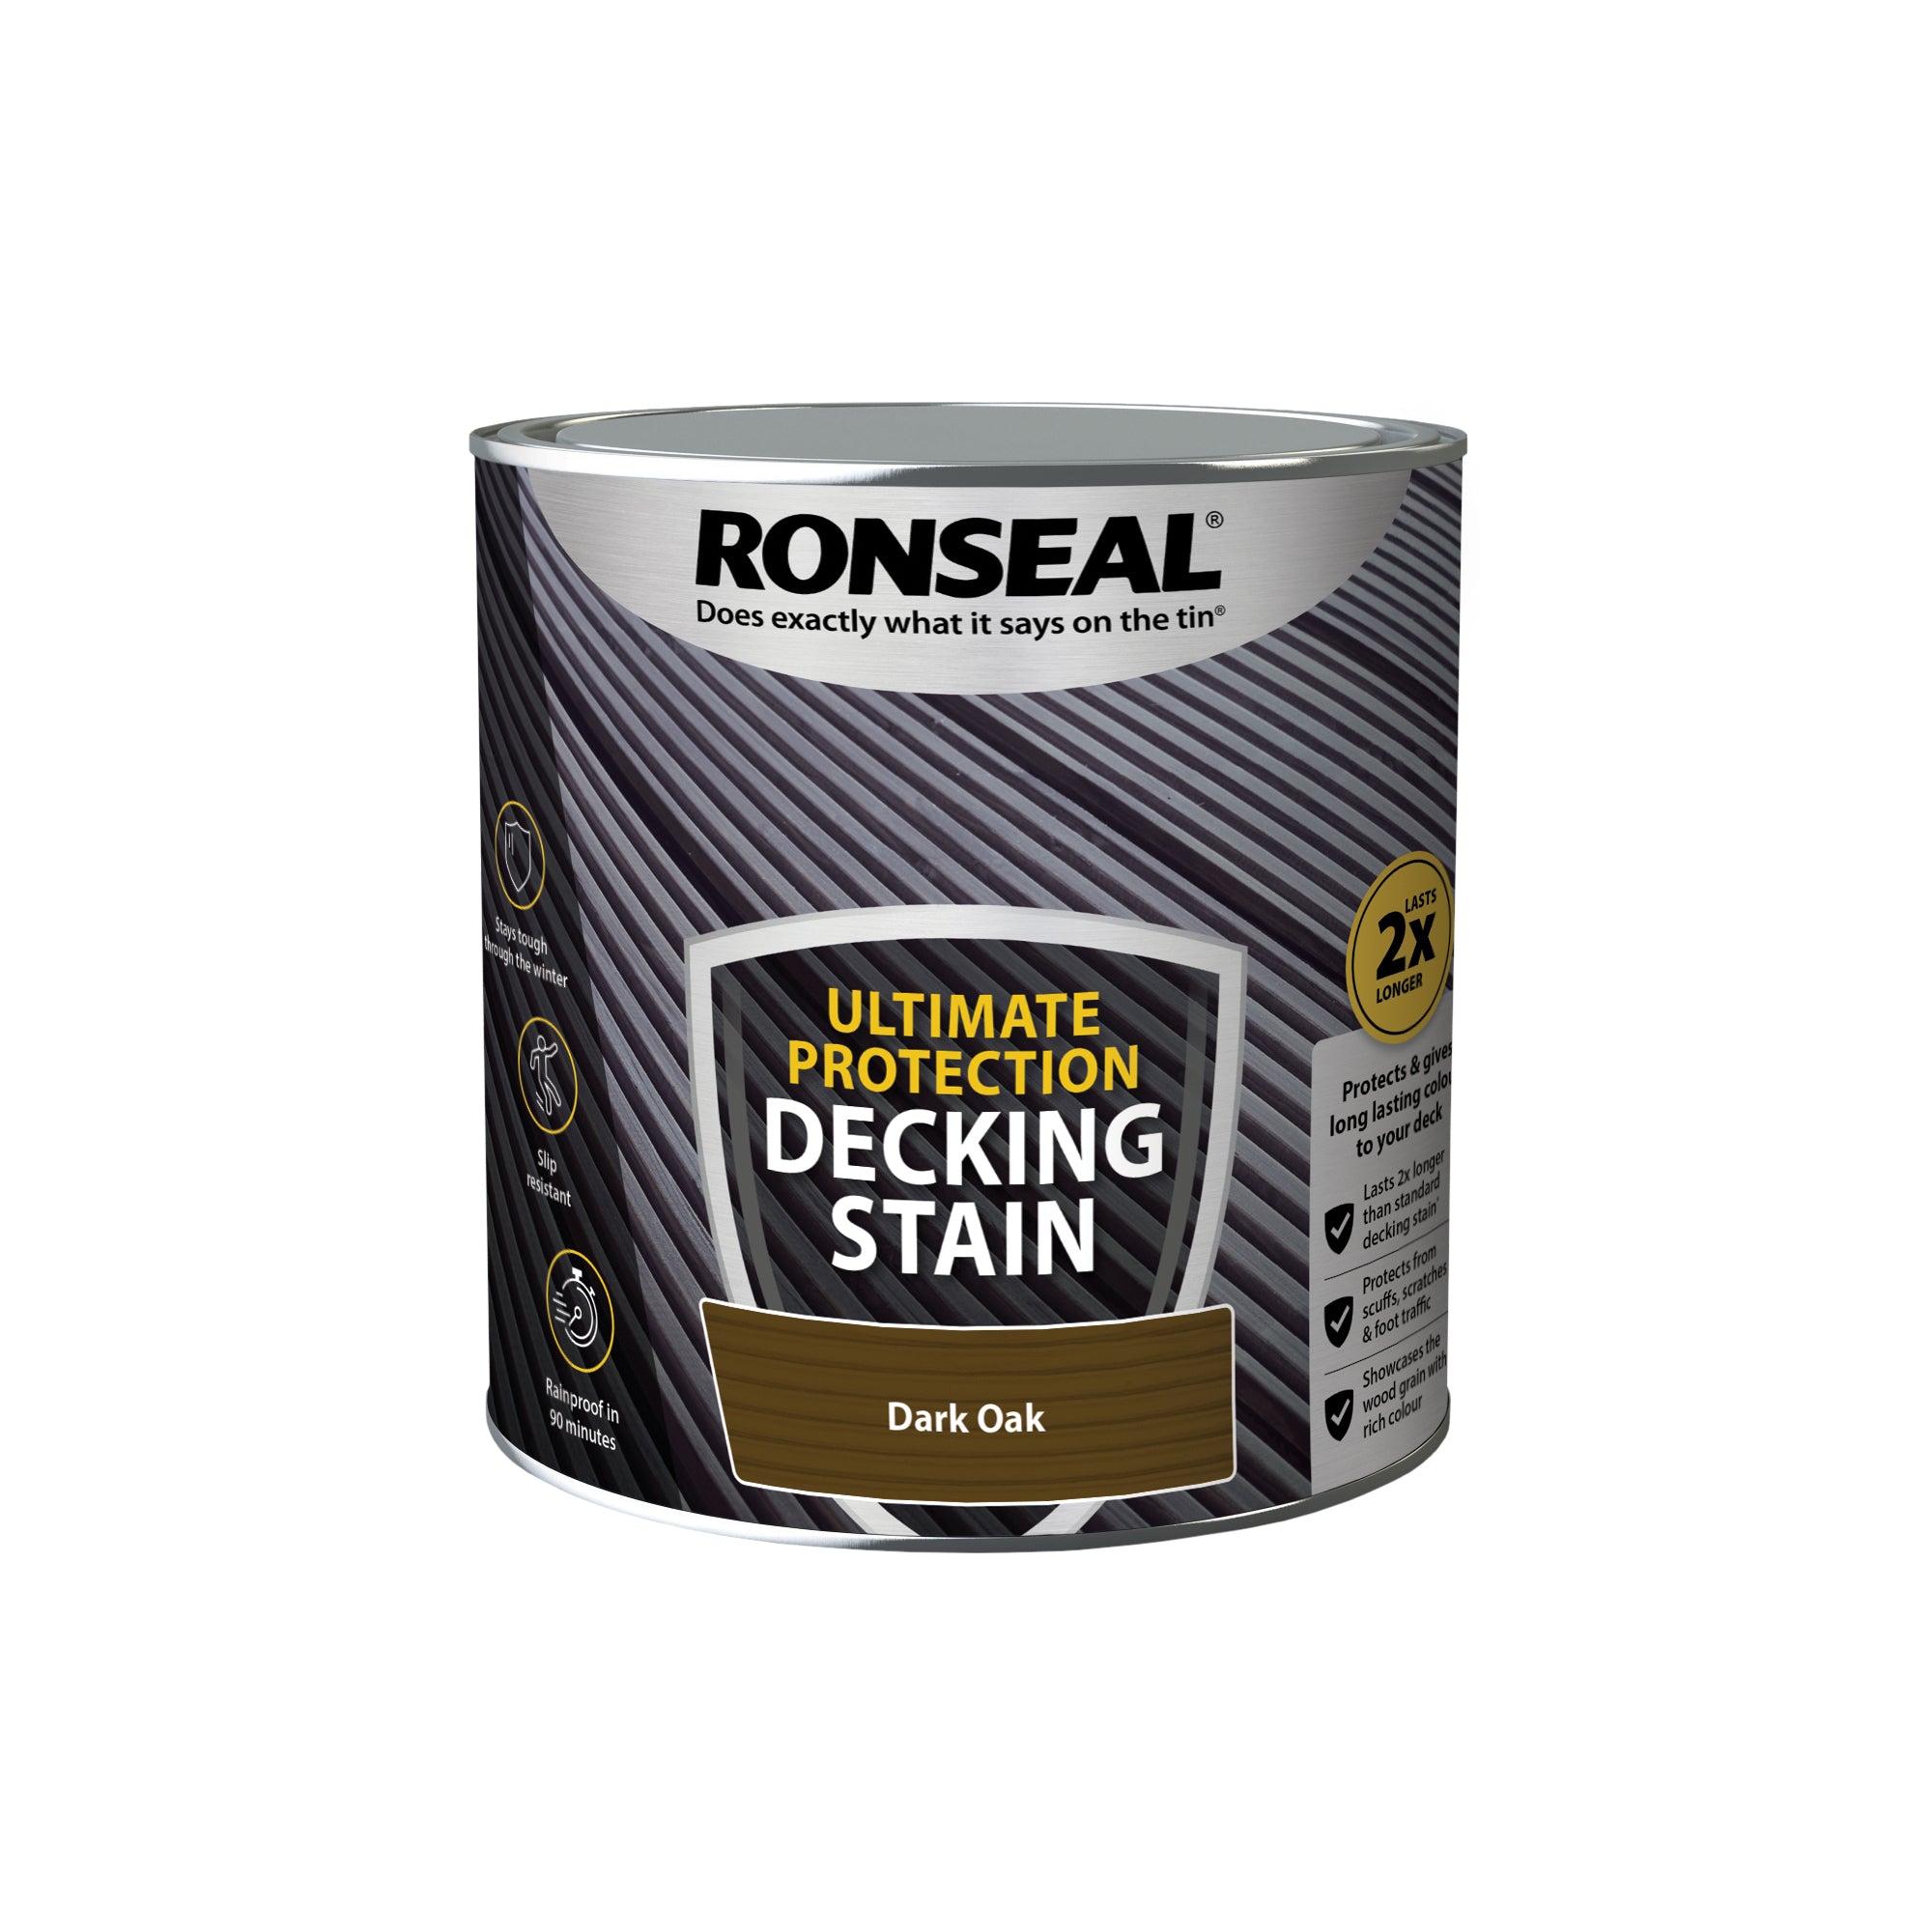 Ronseal-Ultimate-Protection-Decking-Stain-Dark-Oak-2.5L